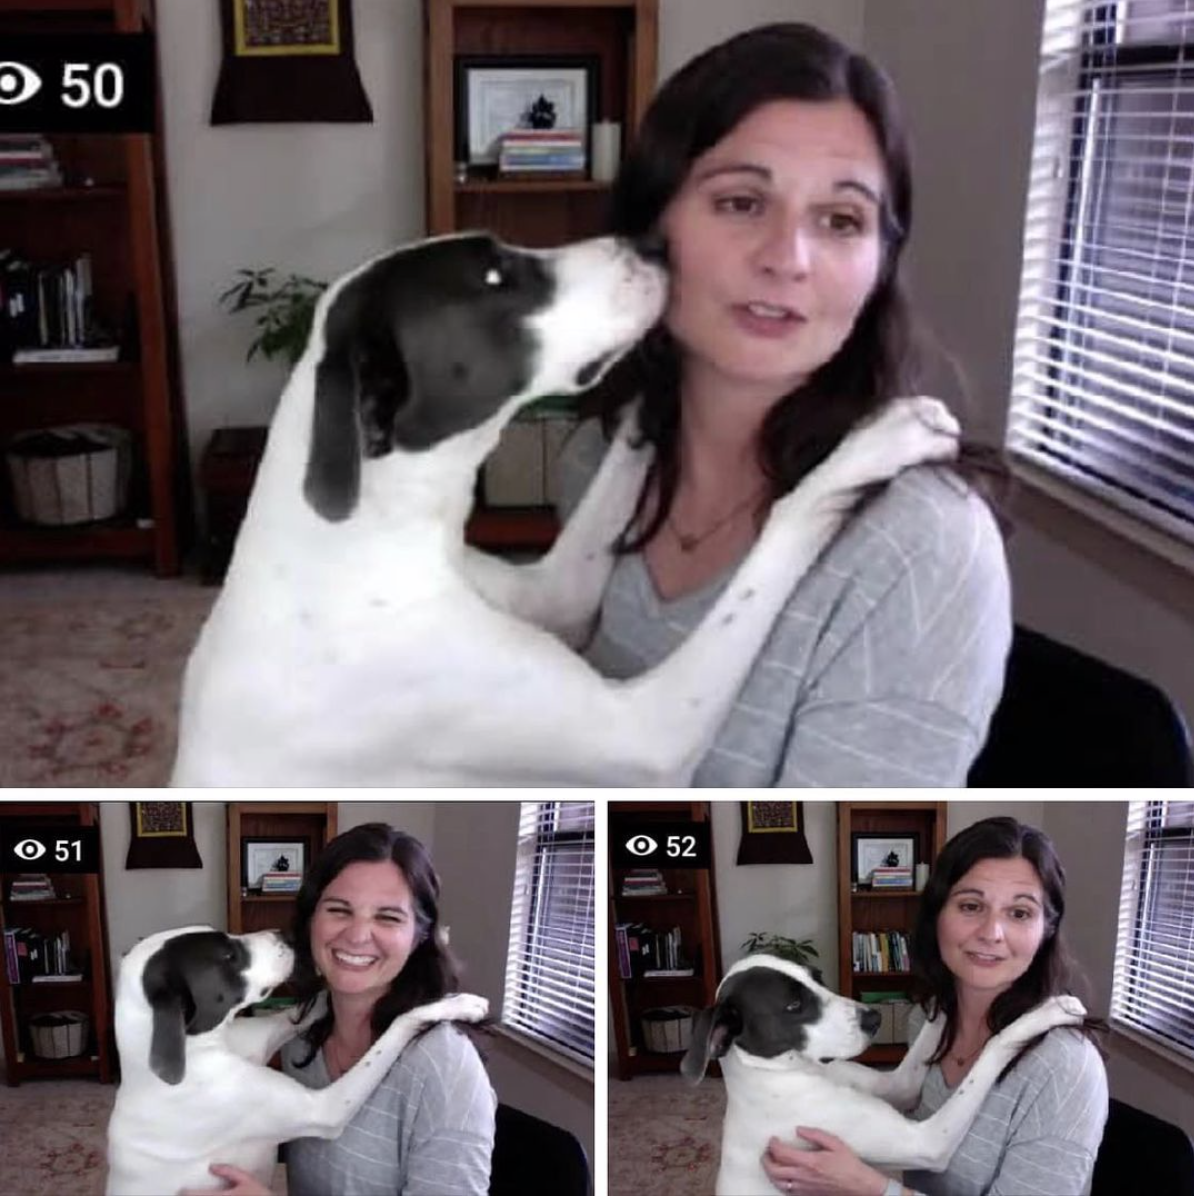 Olive helps with video conferences